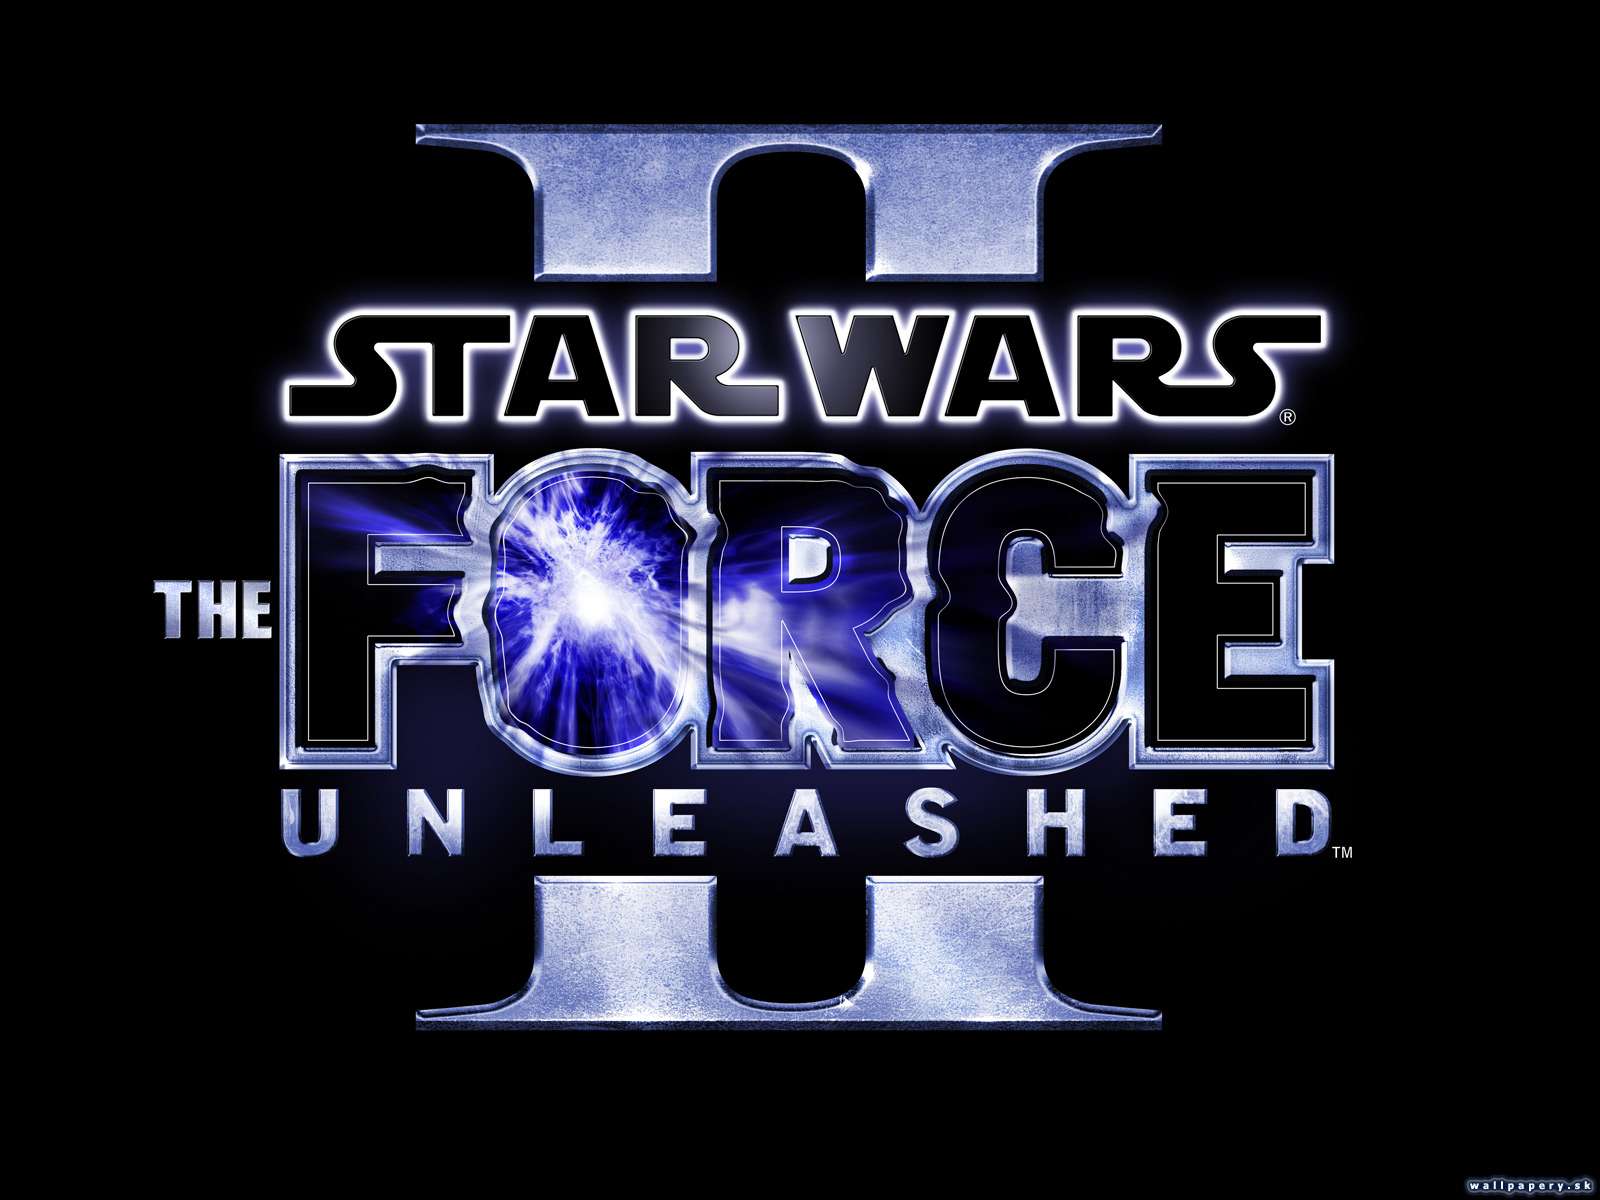 Star Wars: The Force Unleashed 2 - wallpaper 4